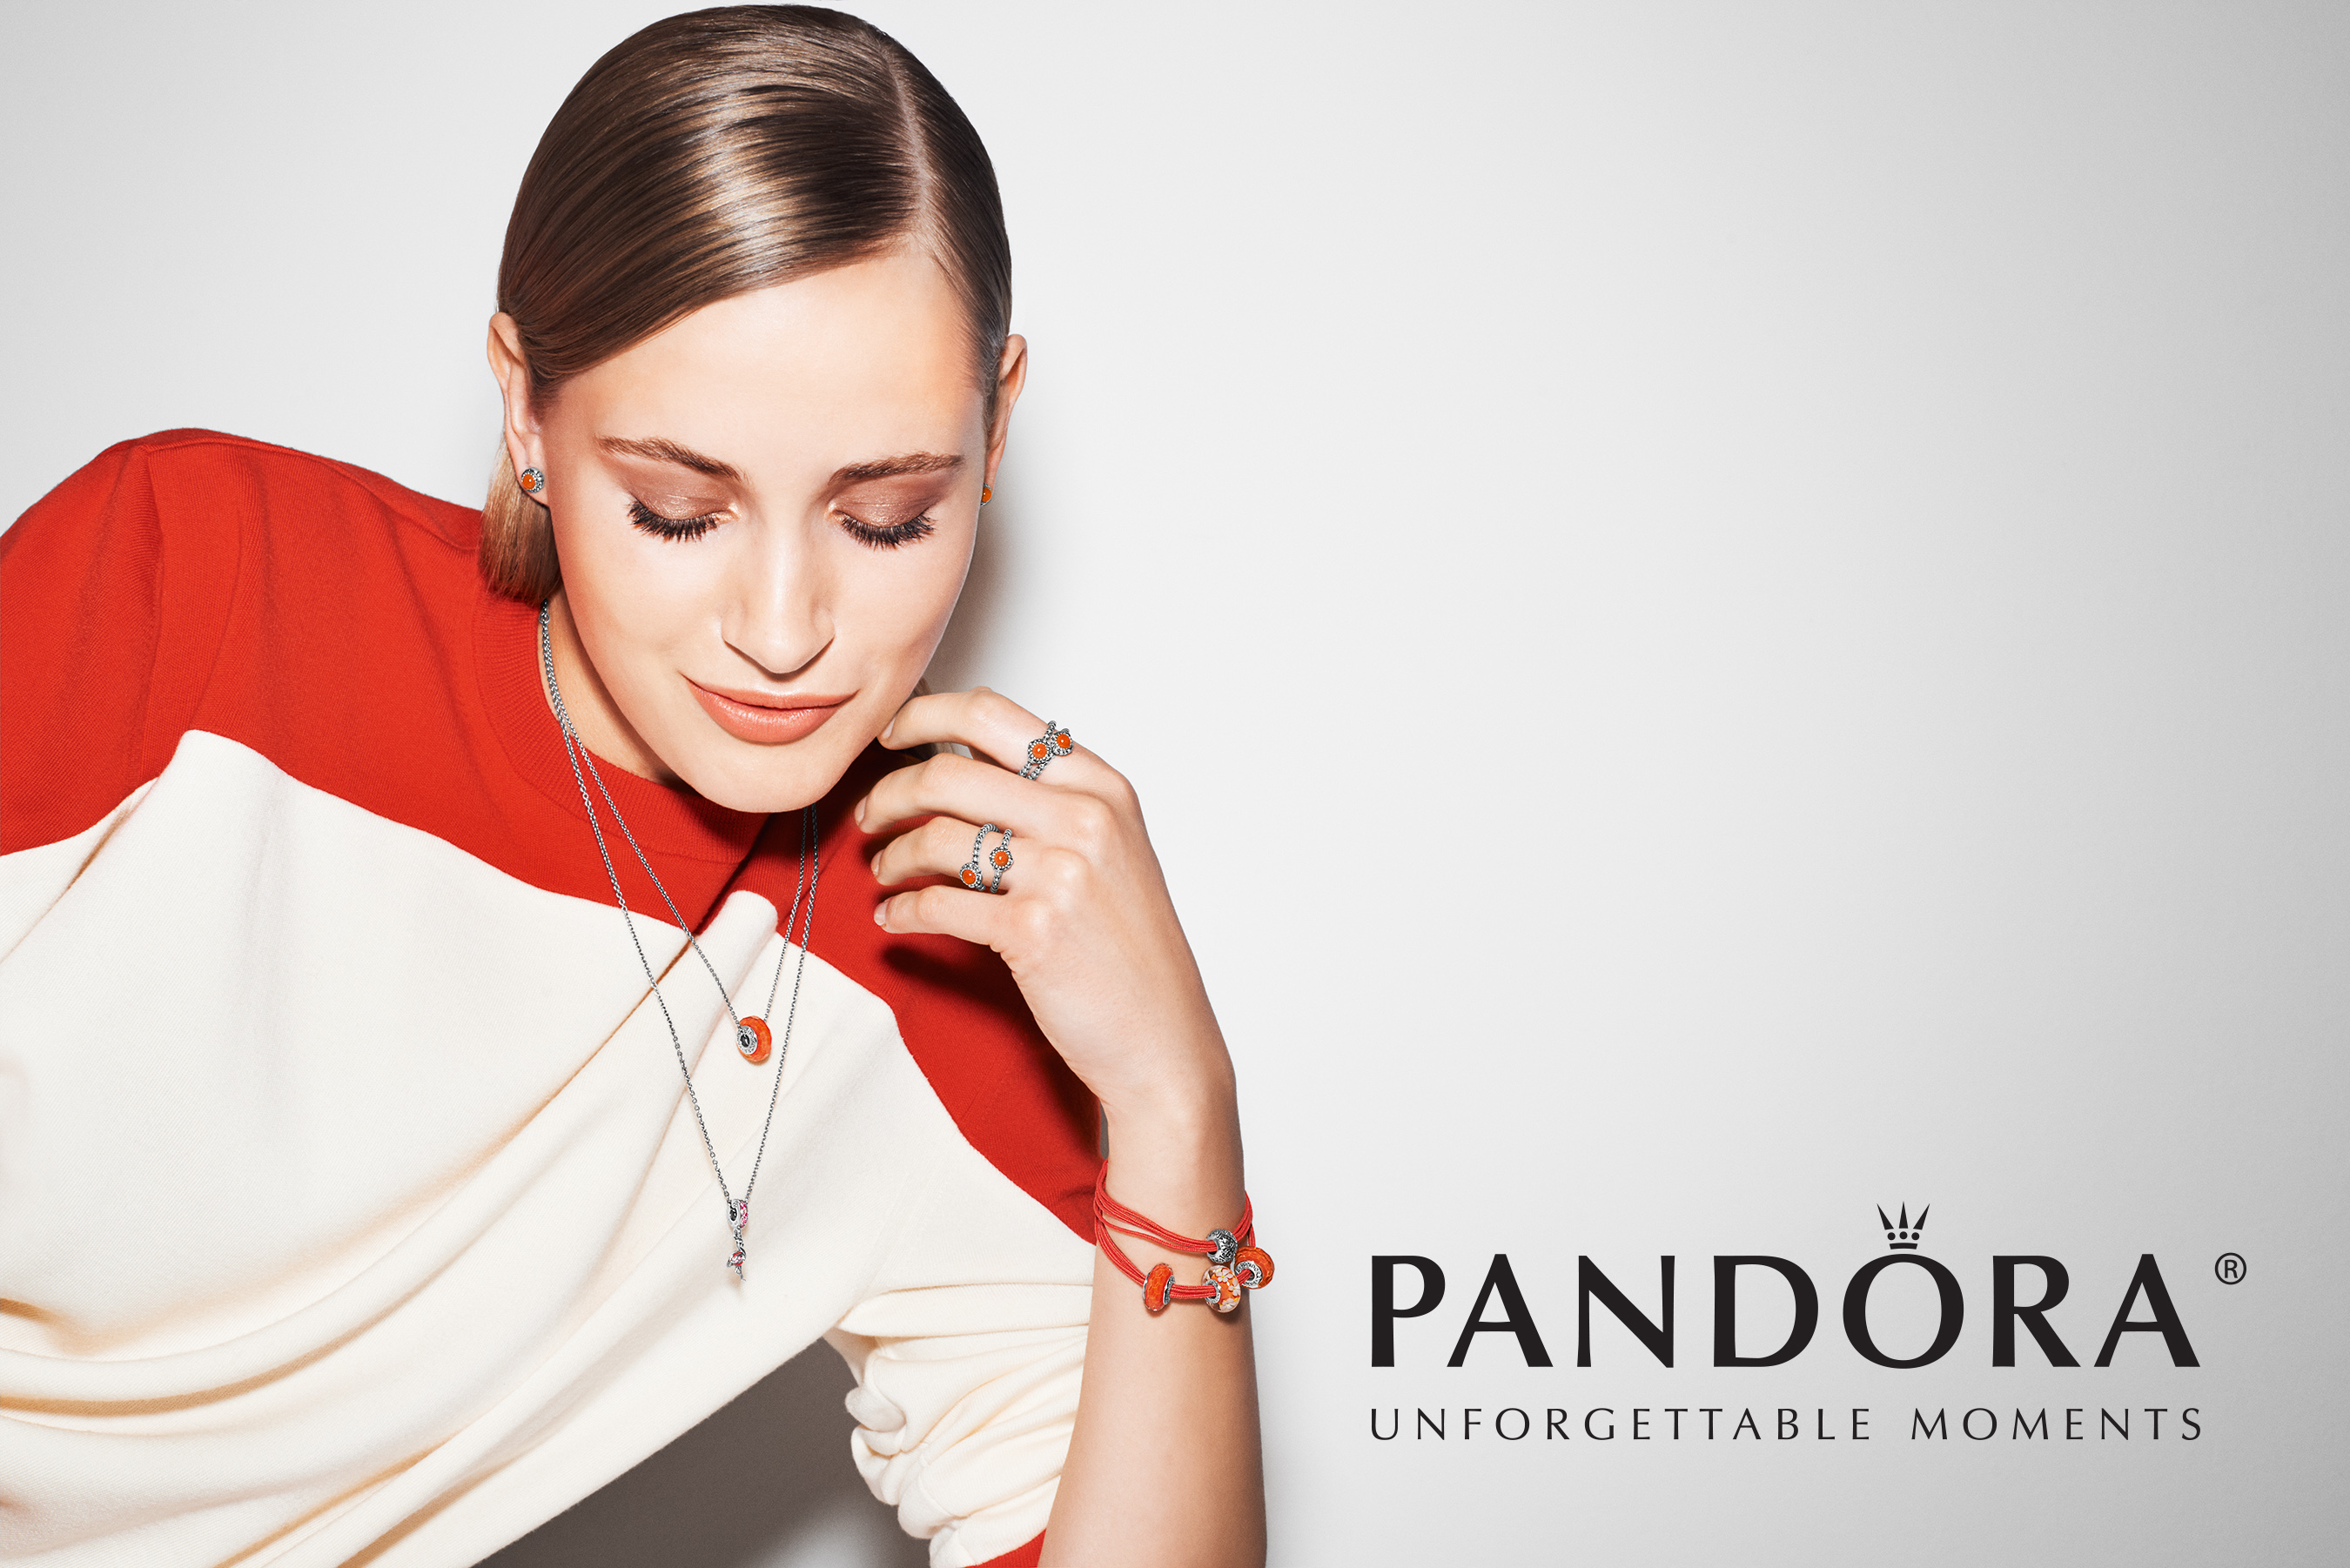 PANDORA Makes Every Month of the Year Unique with the New “Ring the Month” Campaign